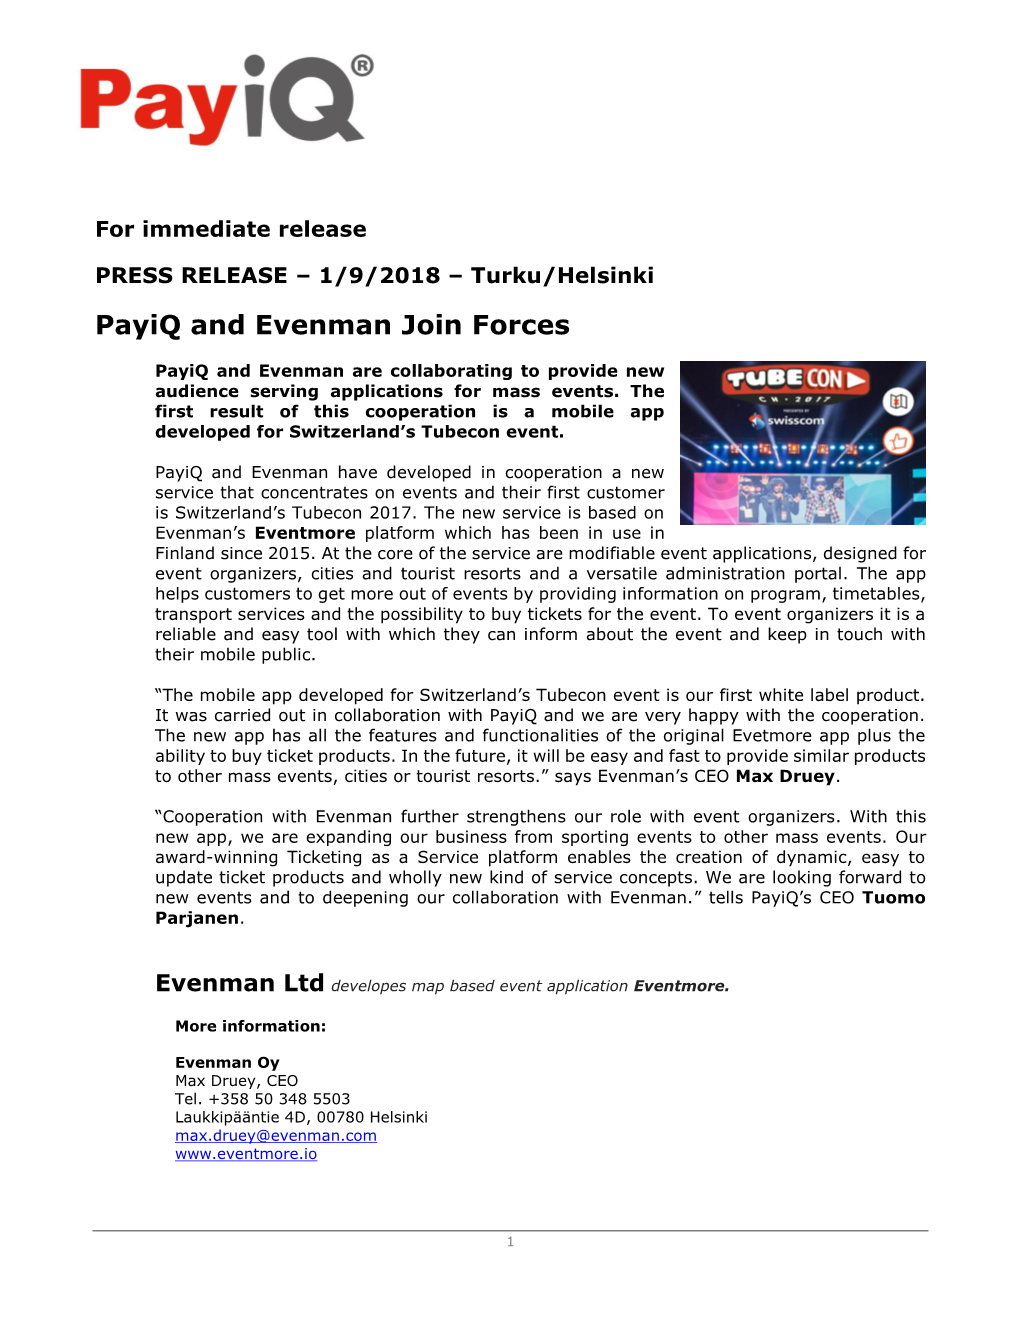 PRESS RELEASE – 1/9/2018 – Turku/Helsinki Payiq and Evenman Join Forces